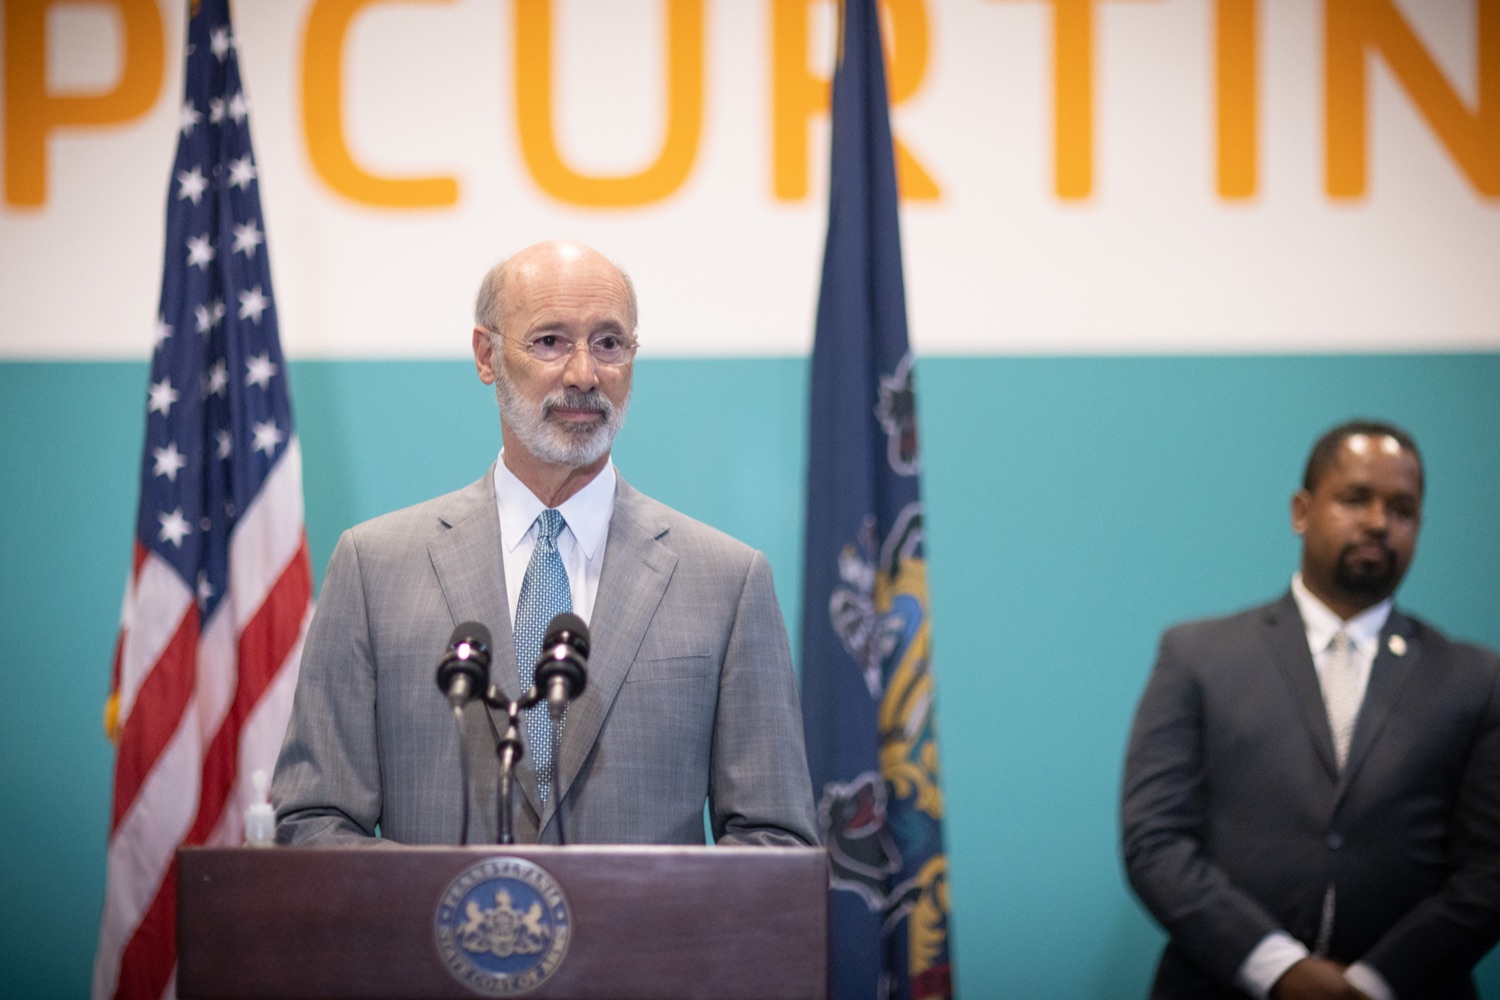 Pennsylvania Governor Tom Wolf speaking with the press.  With some politicians spreading lies about our elections to divide us, Governor Tom Wolf today vowed to protect the freedom to vote and oppose legislation that would create barriers to voting and silence the voices of some Pennsylvanians. These are the same lies that led directly to the appalling assault on our U.S. Capitol and our democracy on January 6, and now, just a few short months later, the same people who fomented, encouraged, and joined that mob are again emerging to undermine the fabric of our nation.   Harrisburg, PA  June 9, 2021<br><a href="https://filesource.amperwave.net/commonwealthofpa/photo/18815_gov_voterRights_dz_008.jpg" target="_blank">⇣ Download Photo</a>